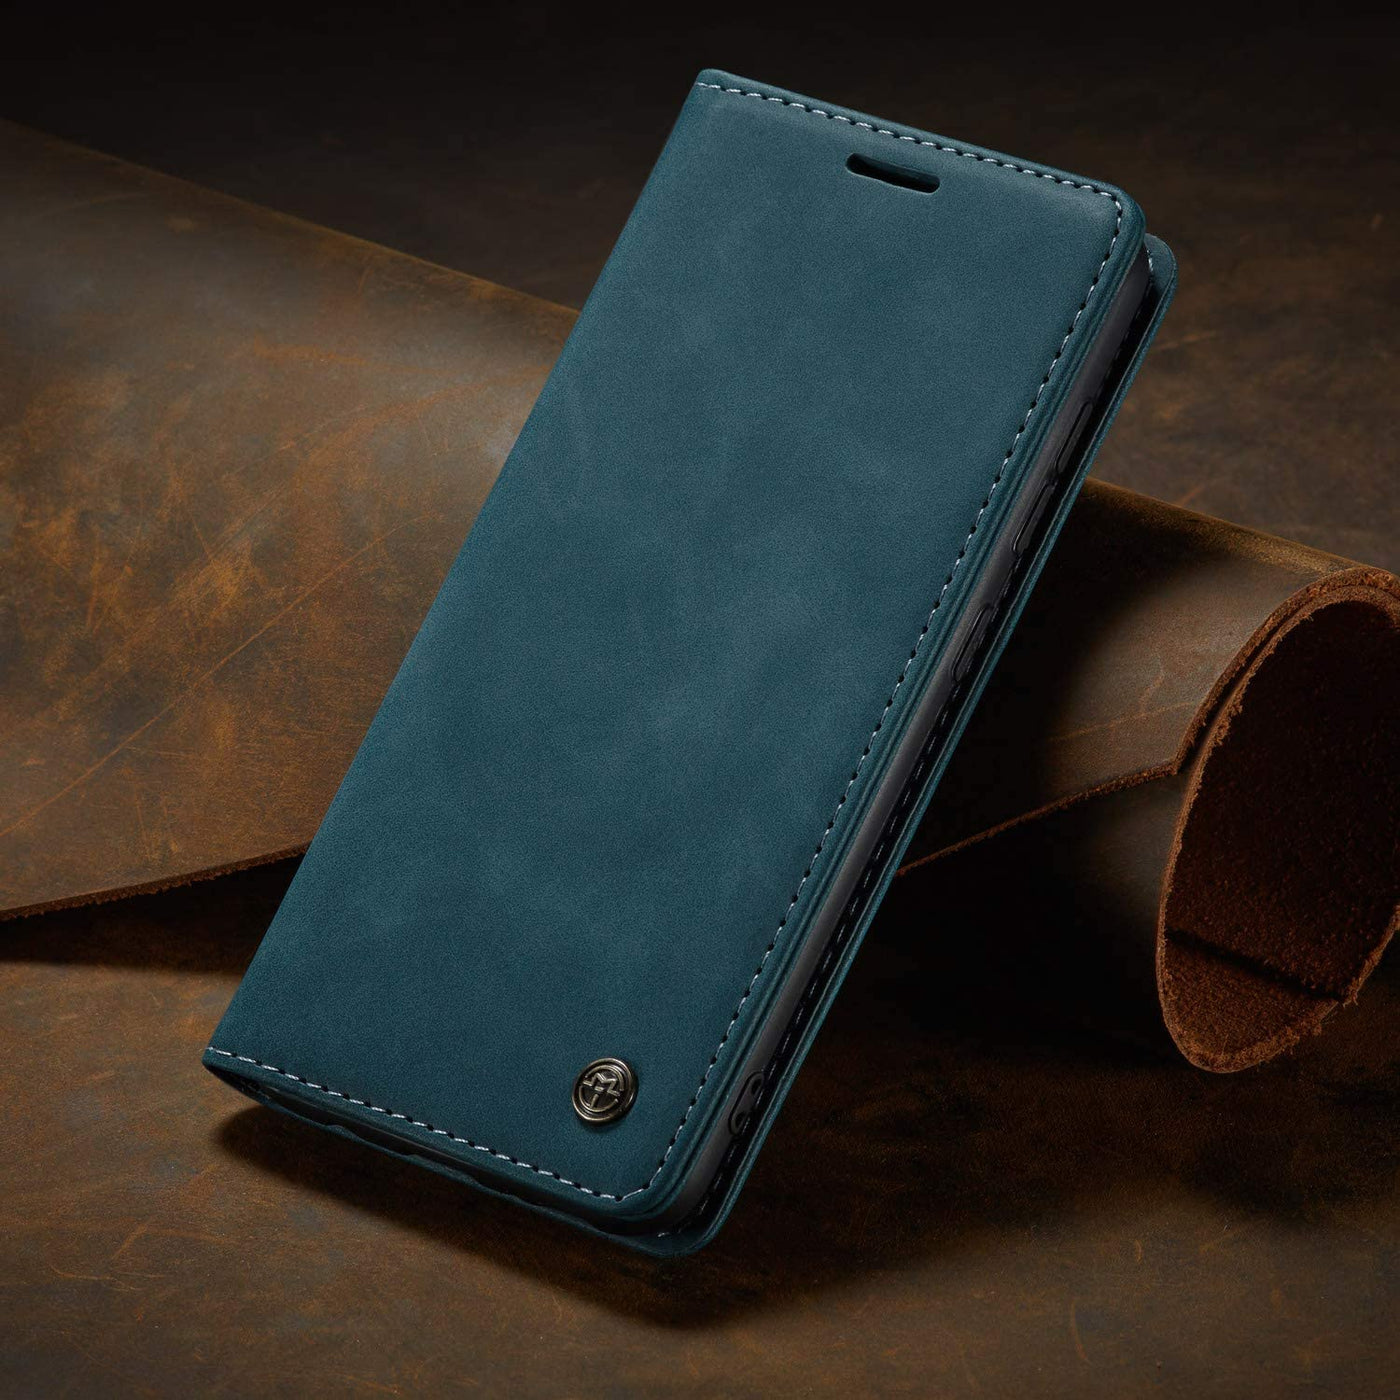 Excelsior Premium Leather Wallet flip Cover Case For Oneplus 9 Pro